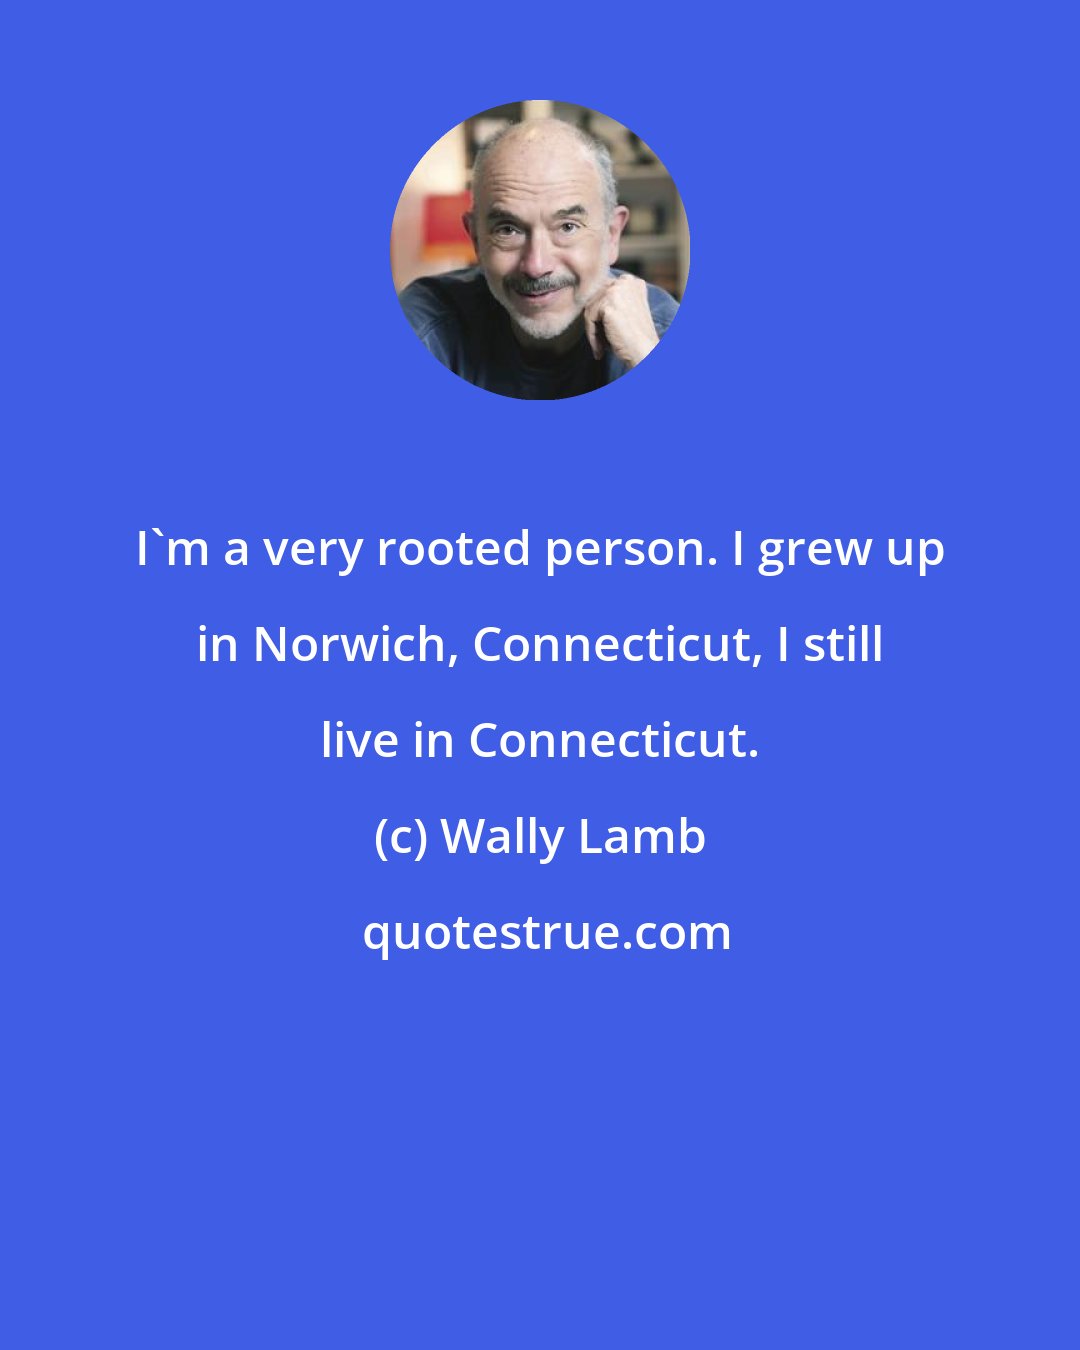 Wally Lamb: I'm a very rooted person. I grew up in Norwich, Connecticut, I still live in Connecticut.